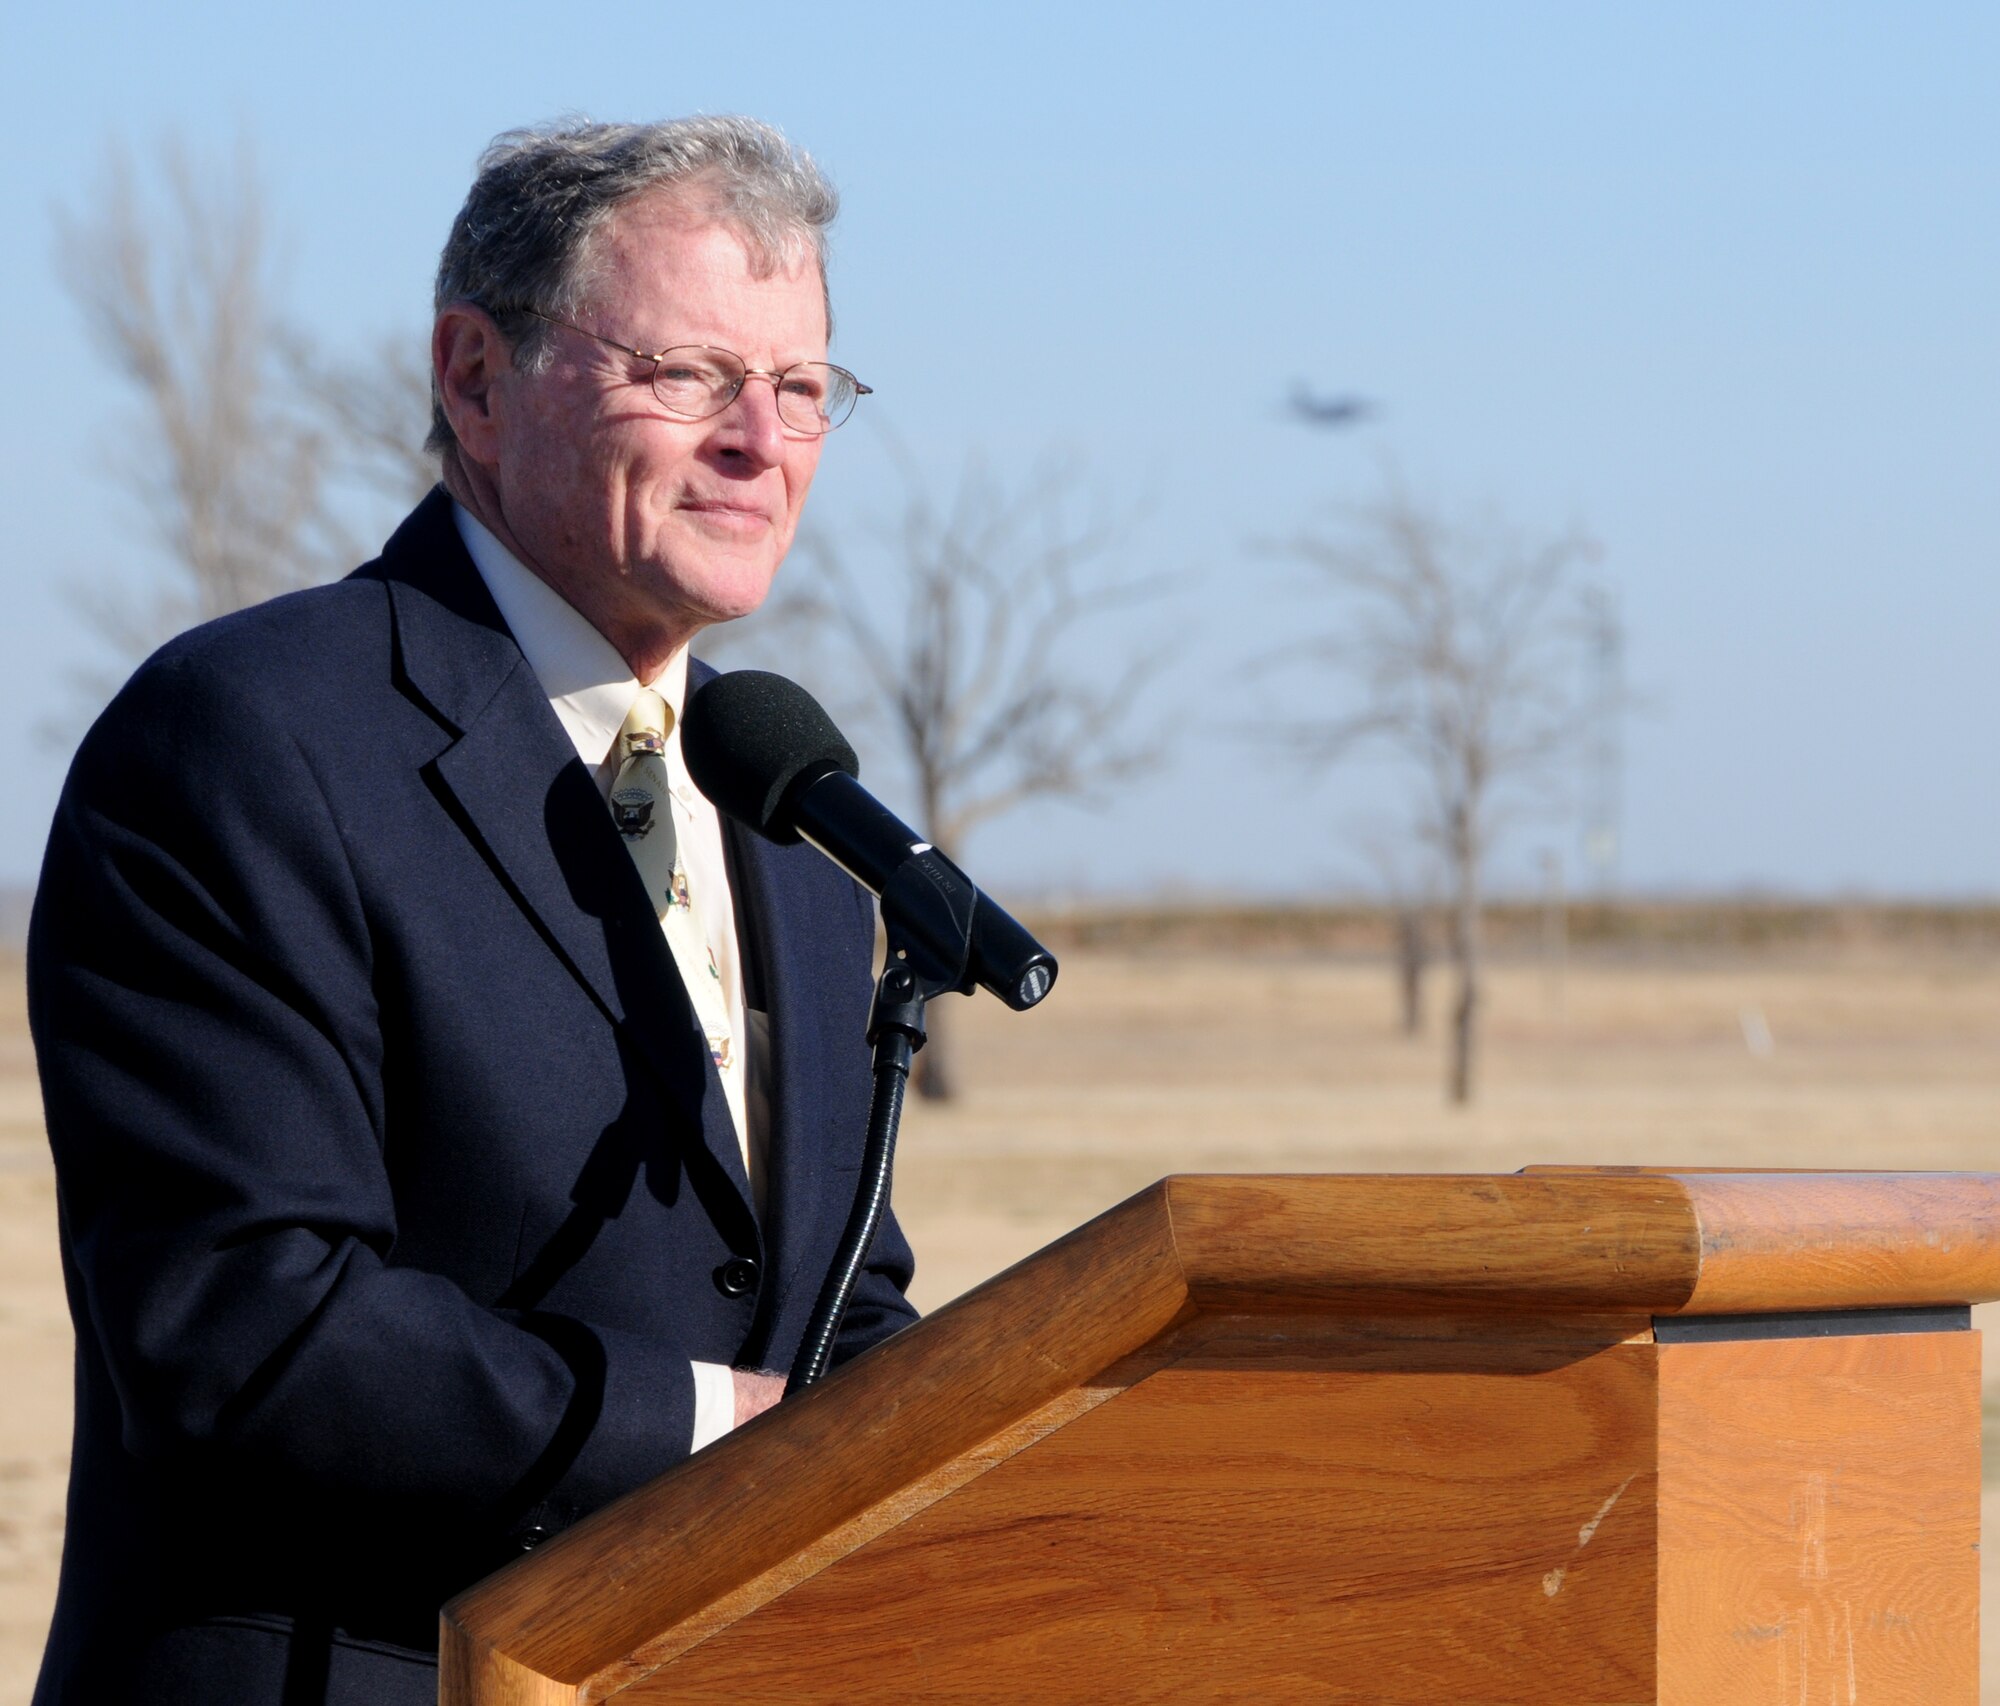 ALTUS AIR FORCE BASE, Okla. -- U.S. Senator Jim Inhofe delivers a speech at the radar approach control groundbreaking ceremony Jan. 22. The senator'ss speech depicted the new facility, which will cost $7.1 million to build and will house the state-of-the art digital aircraft surveillance radar. The new technology will bring air traffic control on base and throughout southwest Oklahoma into the 21st century. (U.S. Air Force photo/Senior Airman Cherice Bryant)
